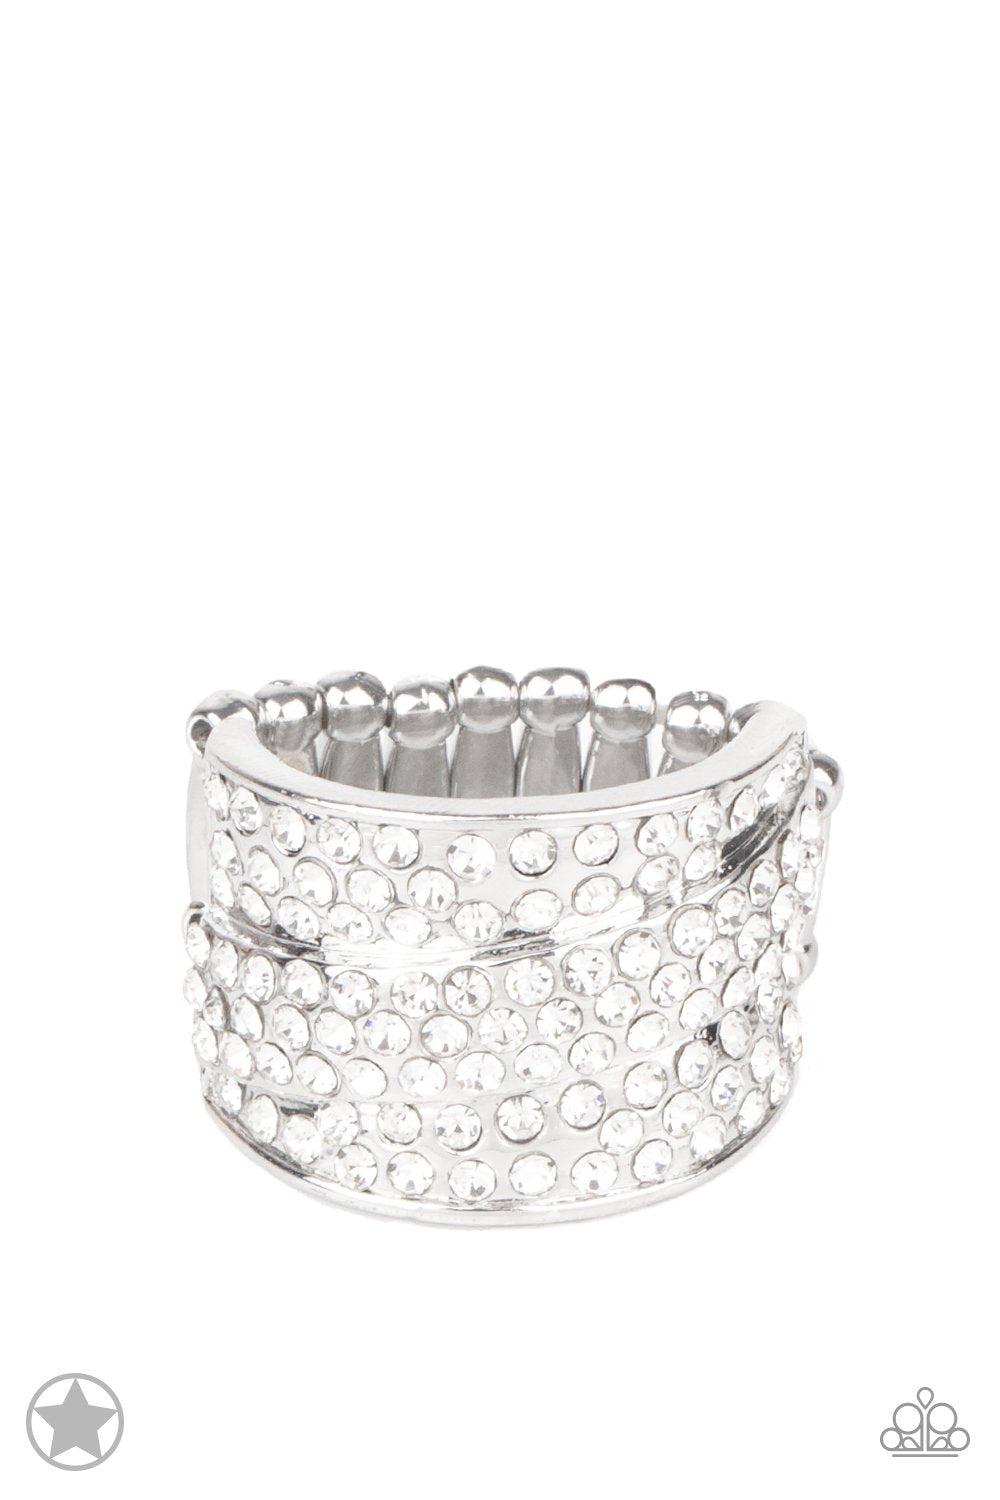 The Millionaires Club White Rhinestone Ring - Paparazzi Accessories - lightbox -CarasShop.com - $5 Jewelry by Cara Jewels